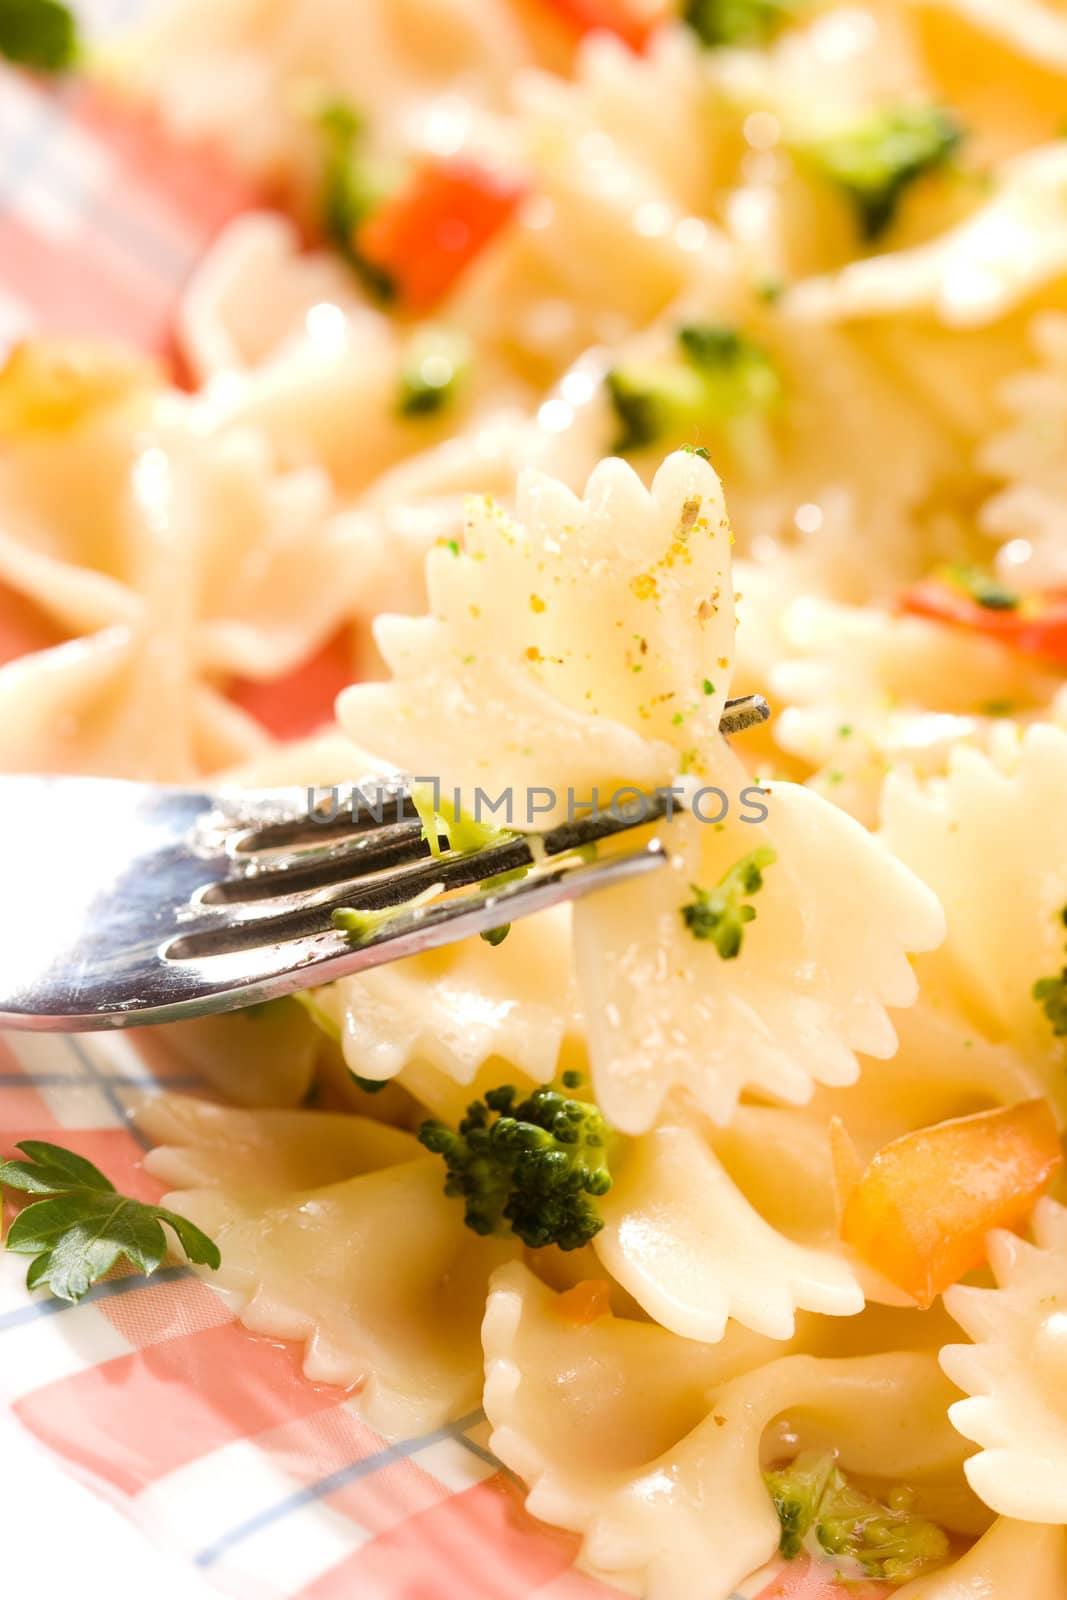 Macro picture of appetizing pasta with vegetables